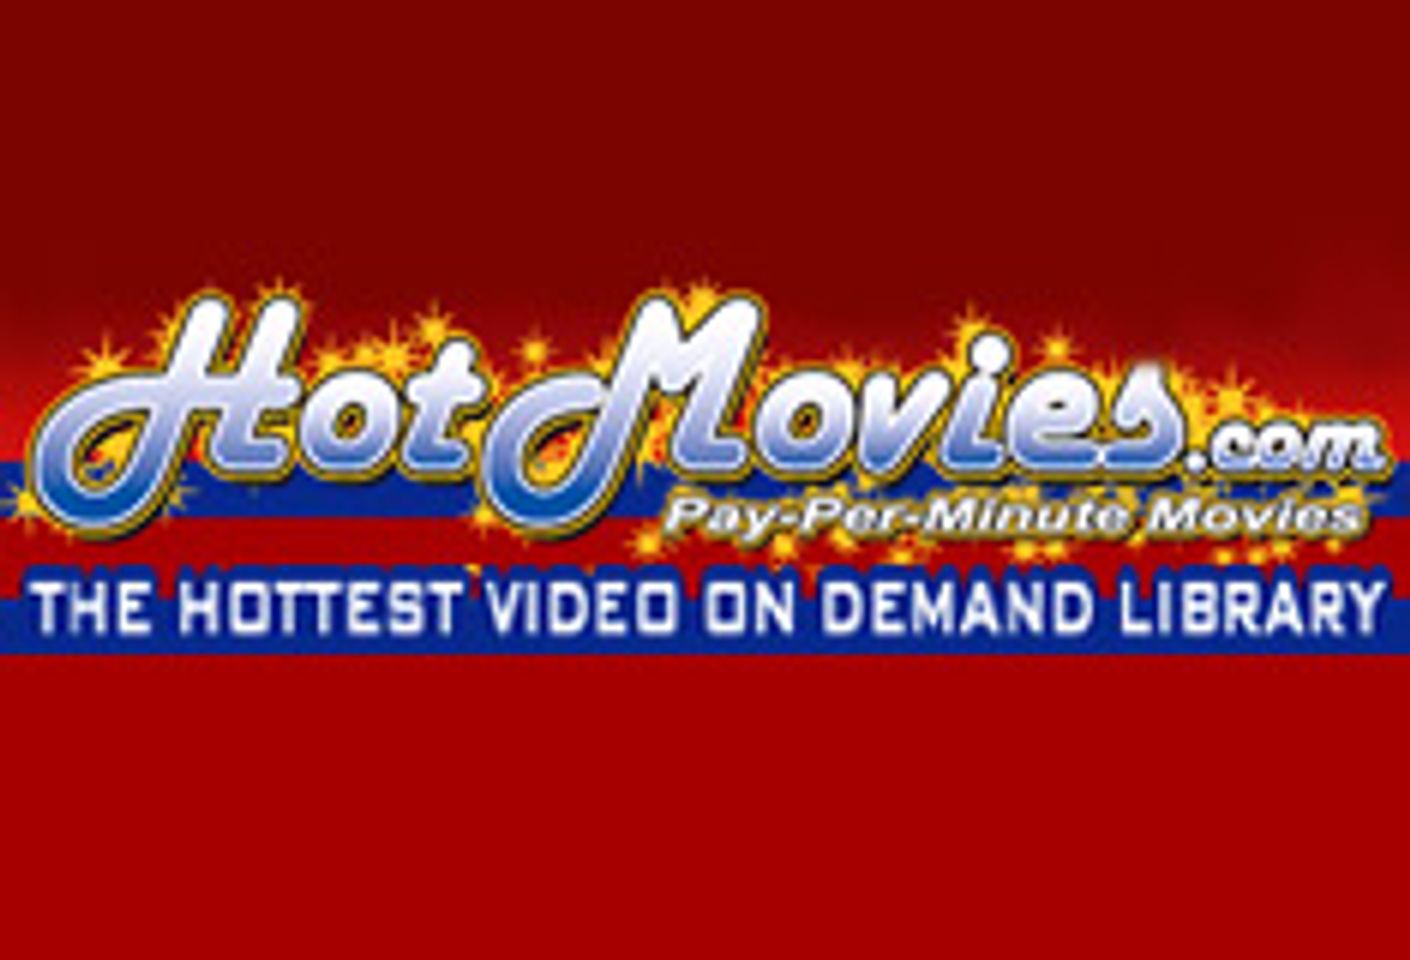 HotMovies.com Coming on Strong